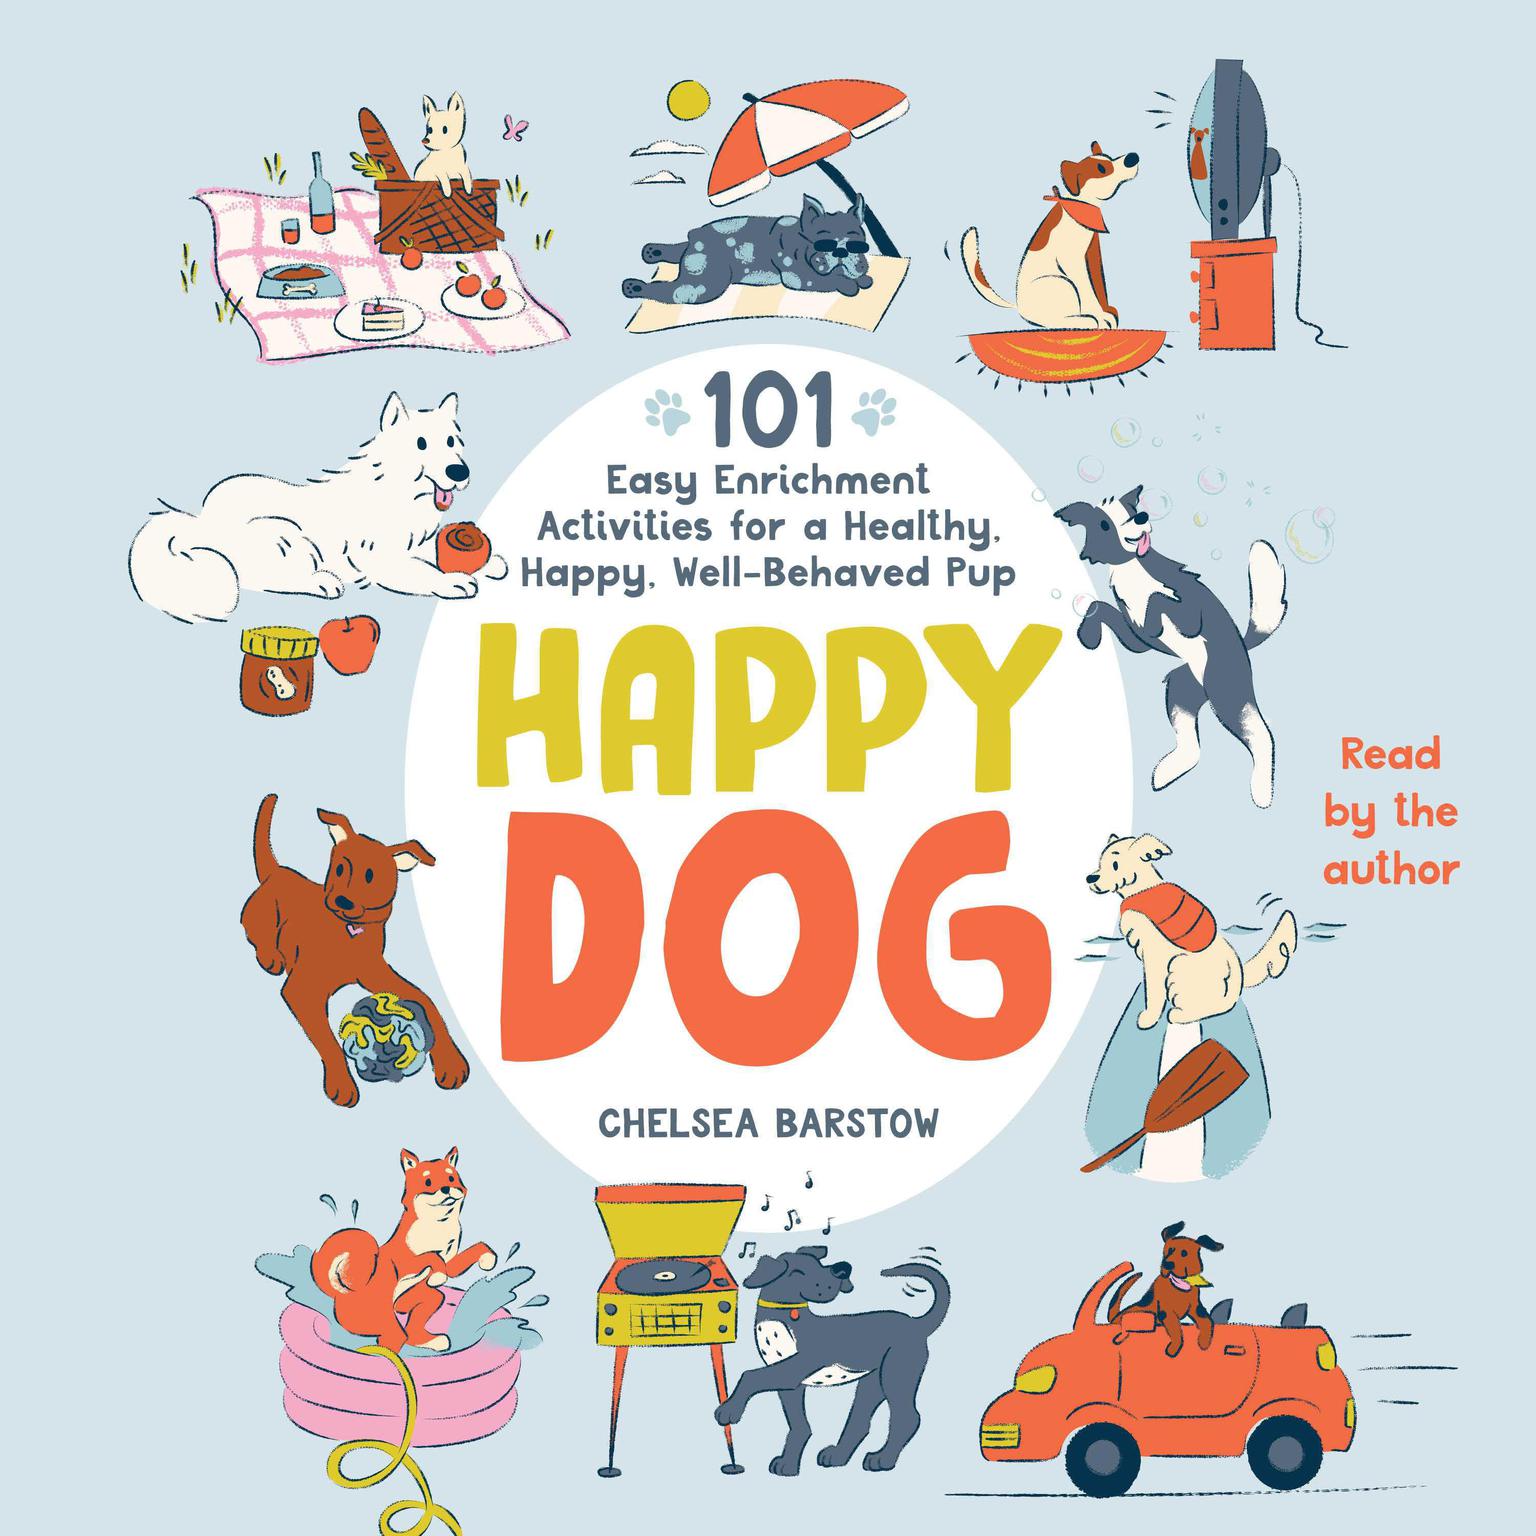 Happy Dog: 101 Easy Enrichment Activities for a Healthy, Happy, Well-Behaved Pup Audiobook, by Chelsea Barstow